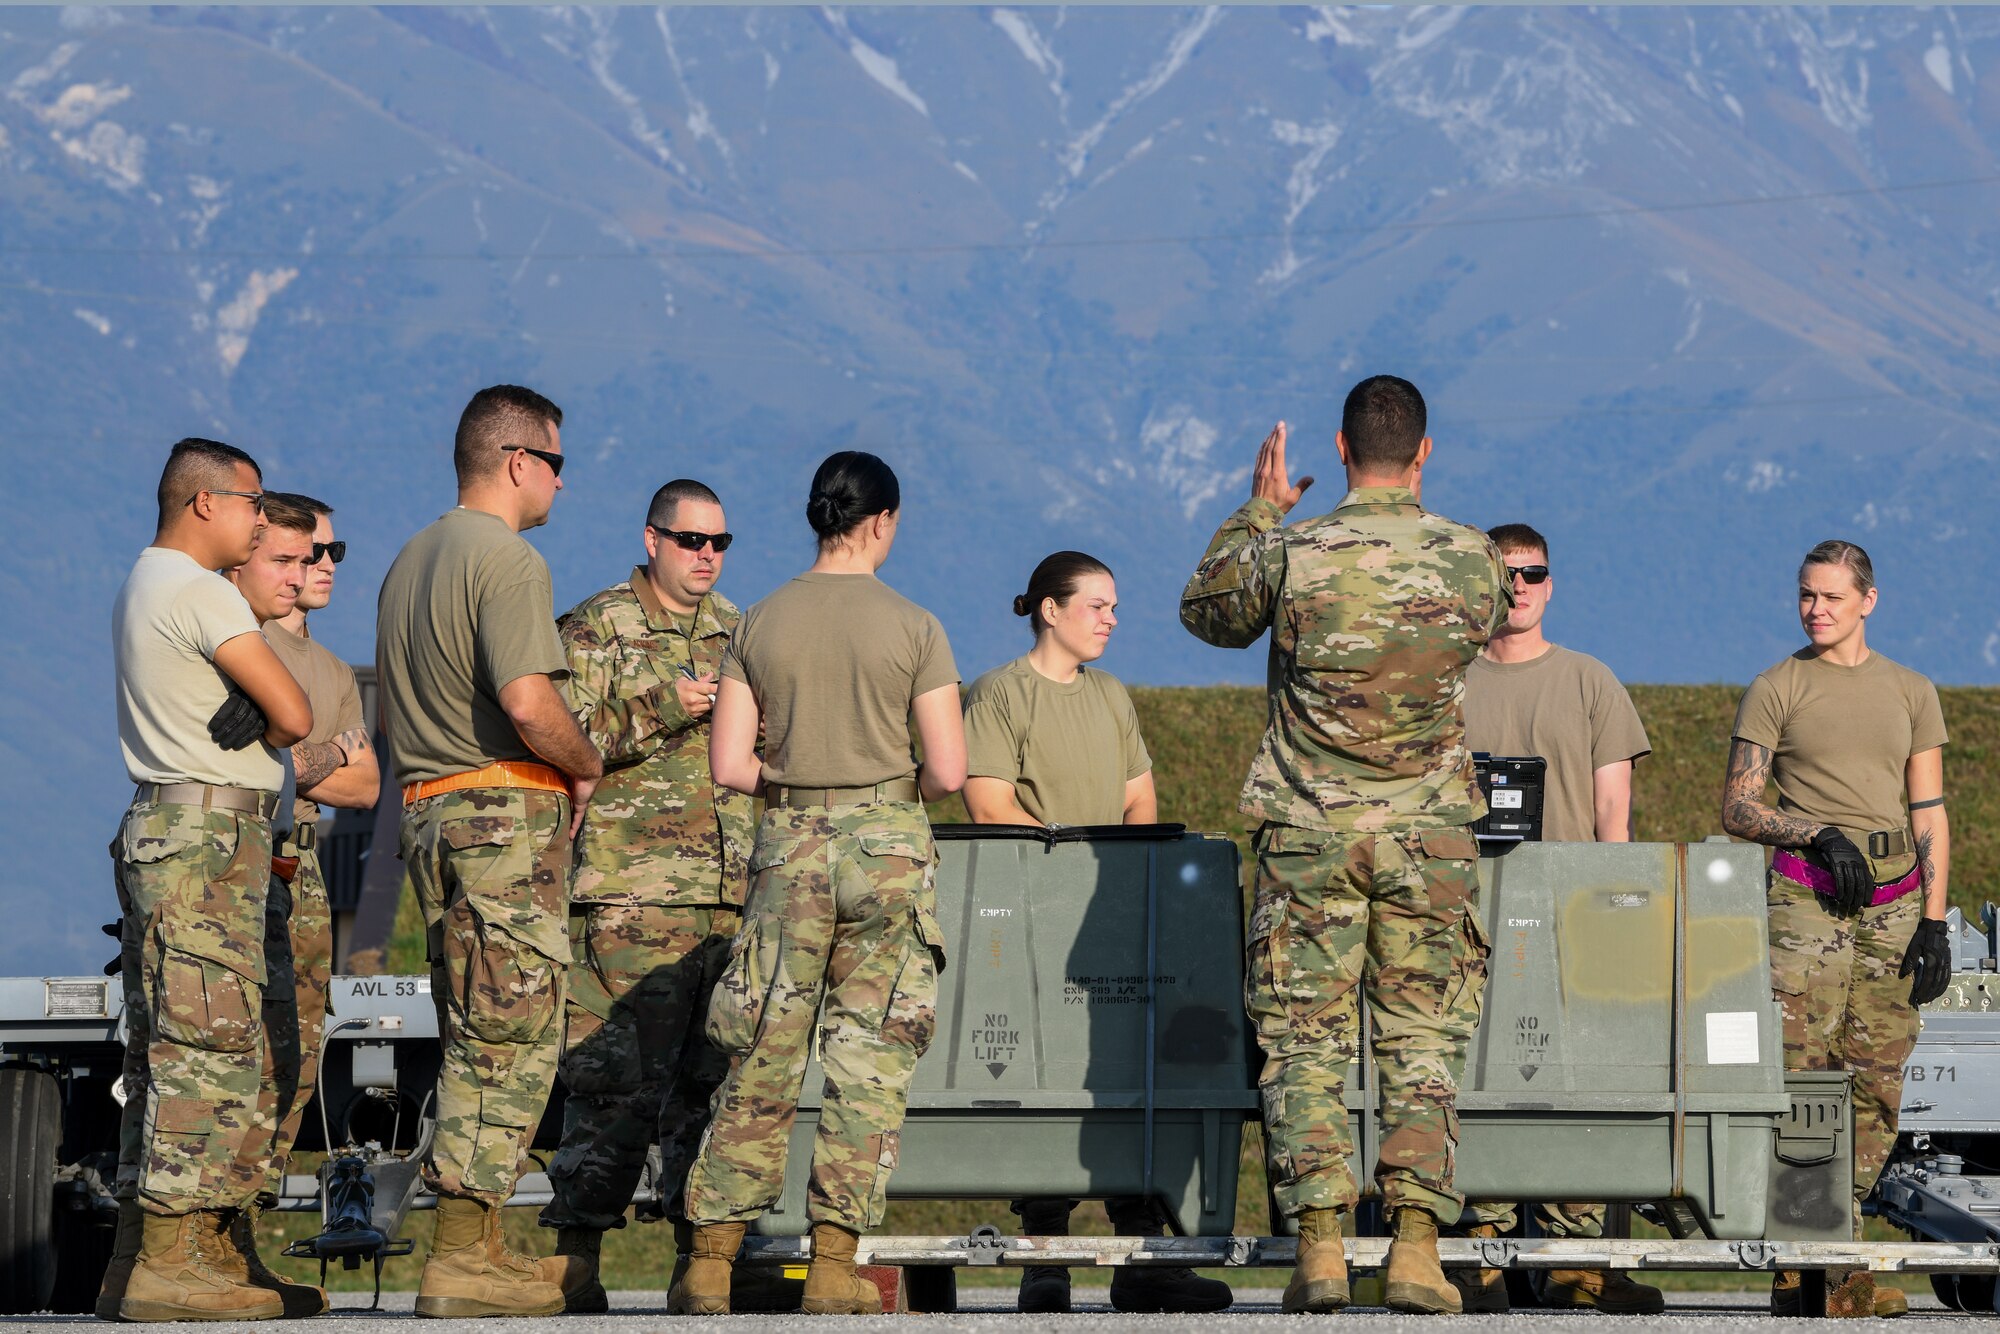 U.S Air Force Senior Master Sgt. Chet Reed, a production flight chief from the 31st Munition Squadron, briefs Airmen about the rules and engagement for the trailer configuration and trailer re-configuration at Aviano Air Base, Italy, Oct. 25, 2019. The competition consisted of six evaluated events, a written test, stockpile practices, trailer configuration, trailer re-configuration, 463L palletization and a weapons build.  (U.S. Air Force photo by Airman 1st Class Ericka A. Woolever).